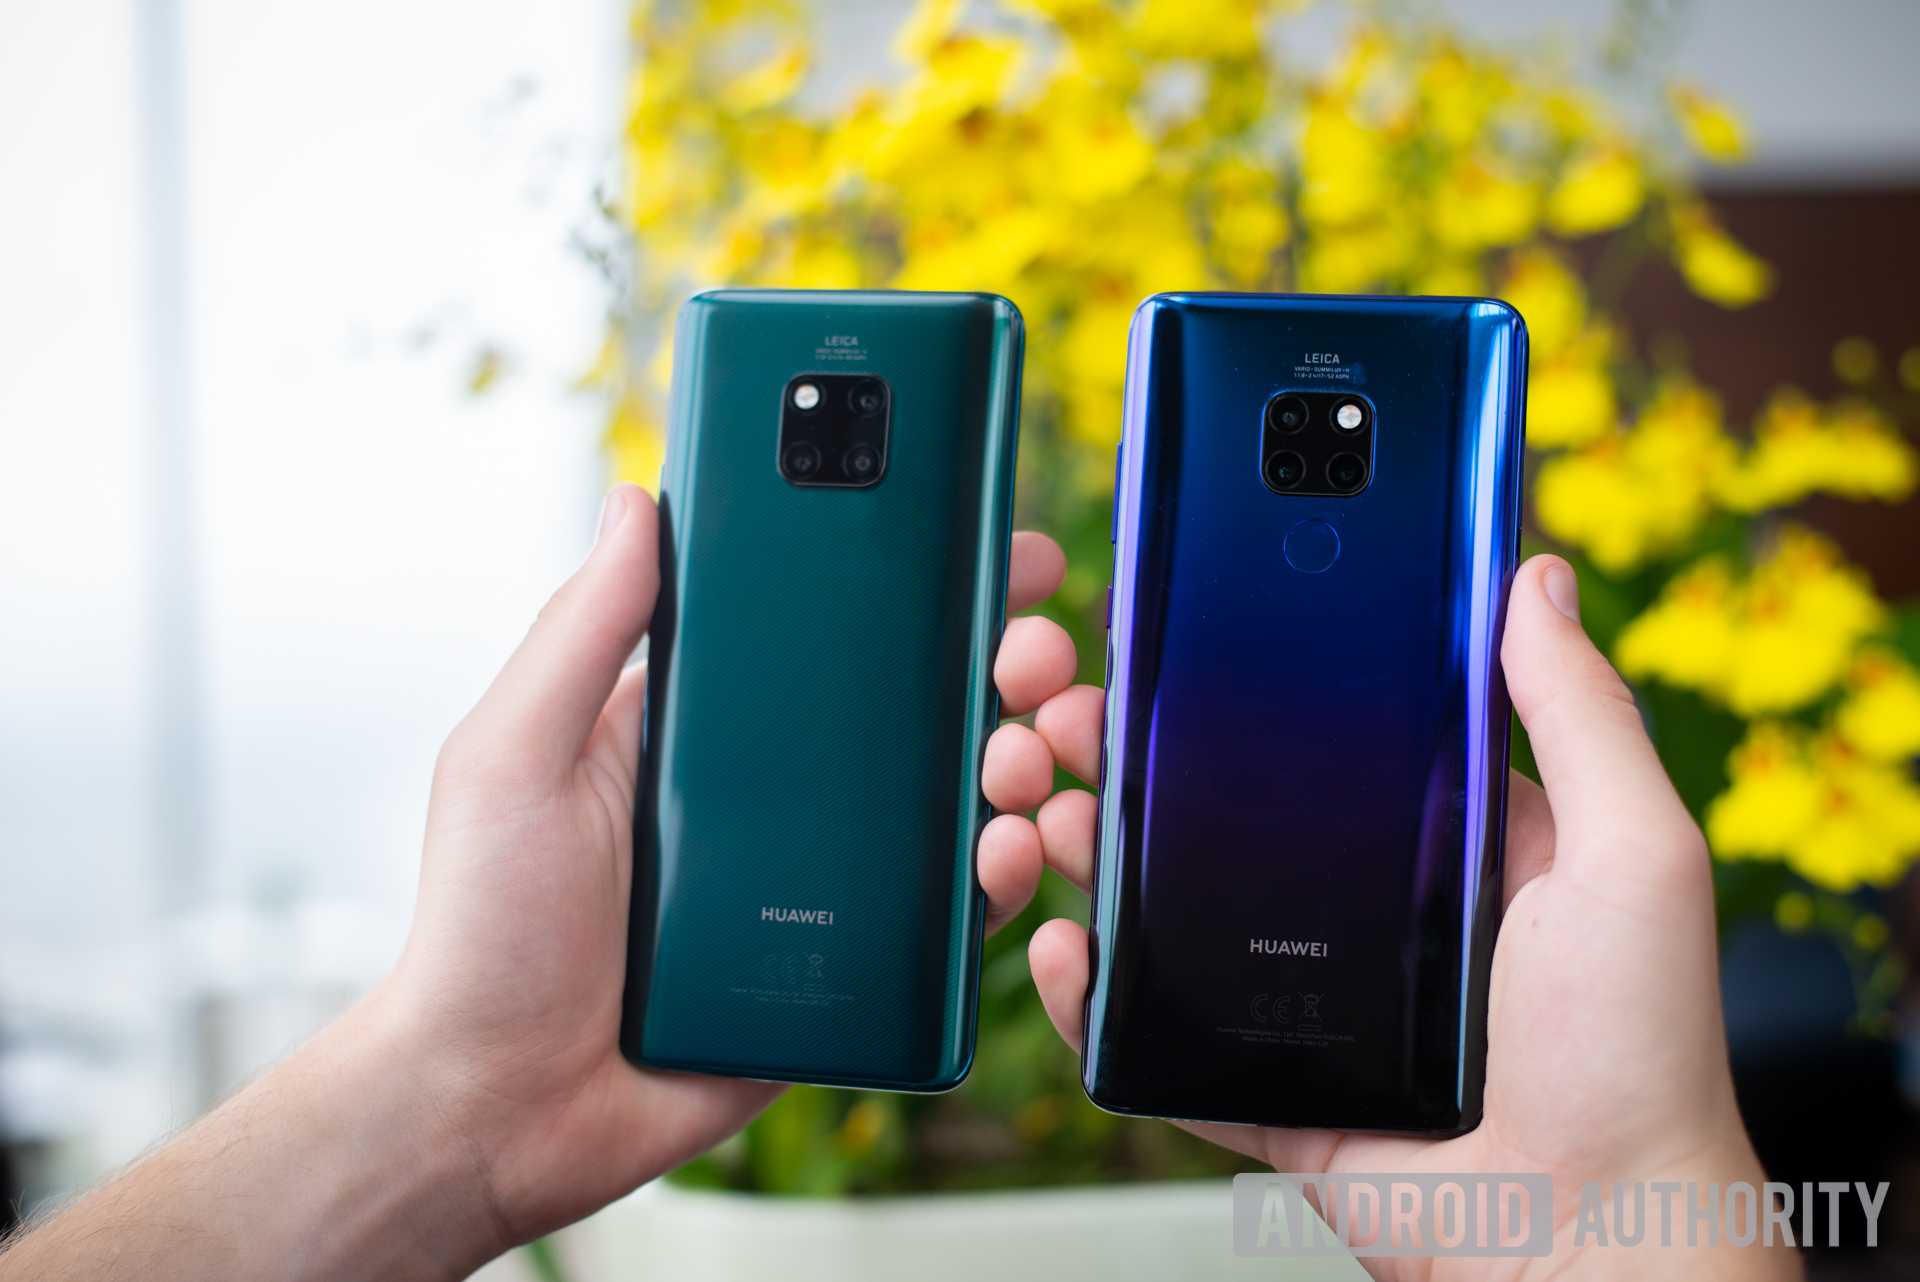 Correct kubus Wrok HUAWEI Mate 20 Pro and HUAWEI Mate 20: Specs, release date, price